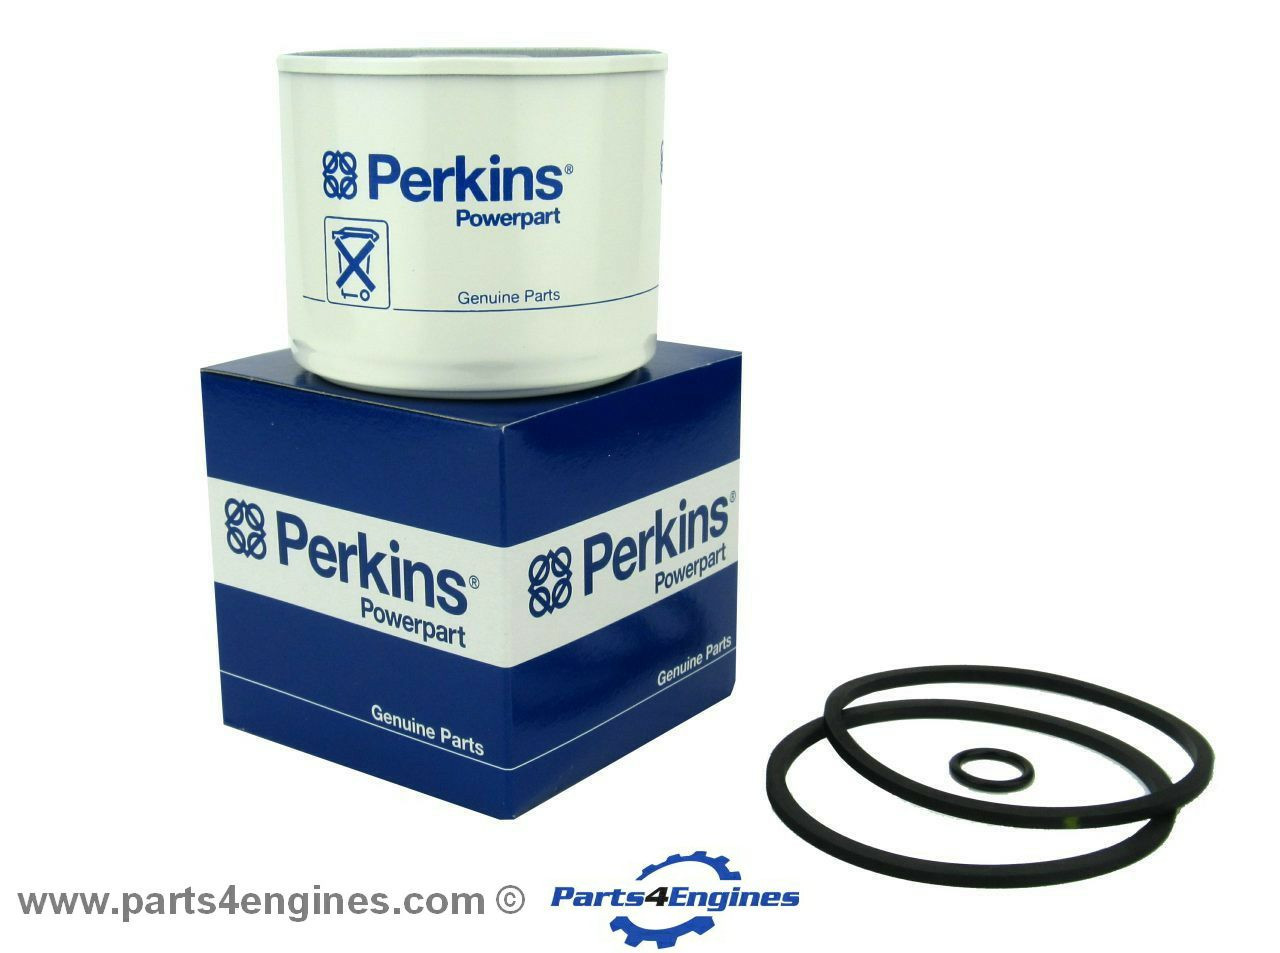 Perkins 100 Series from parts4engines.com